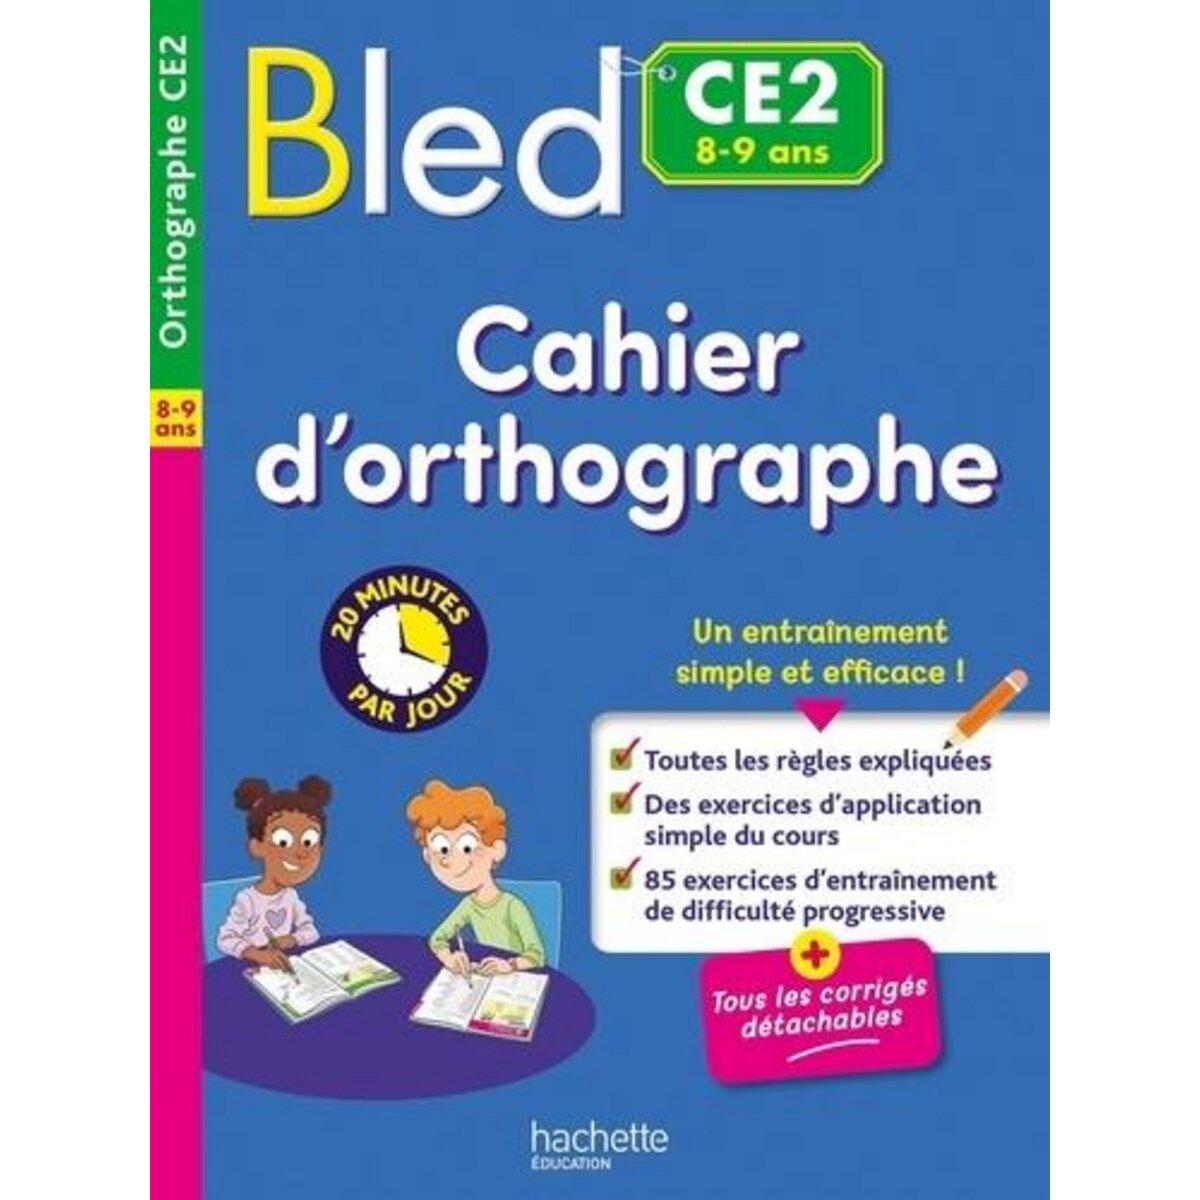  BLED CE2. CAHIER D'ORTHOGRAPHE, Couque Claude